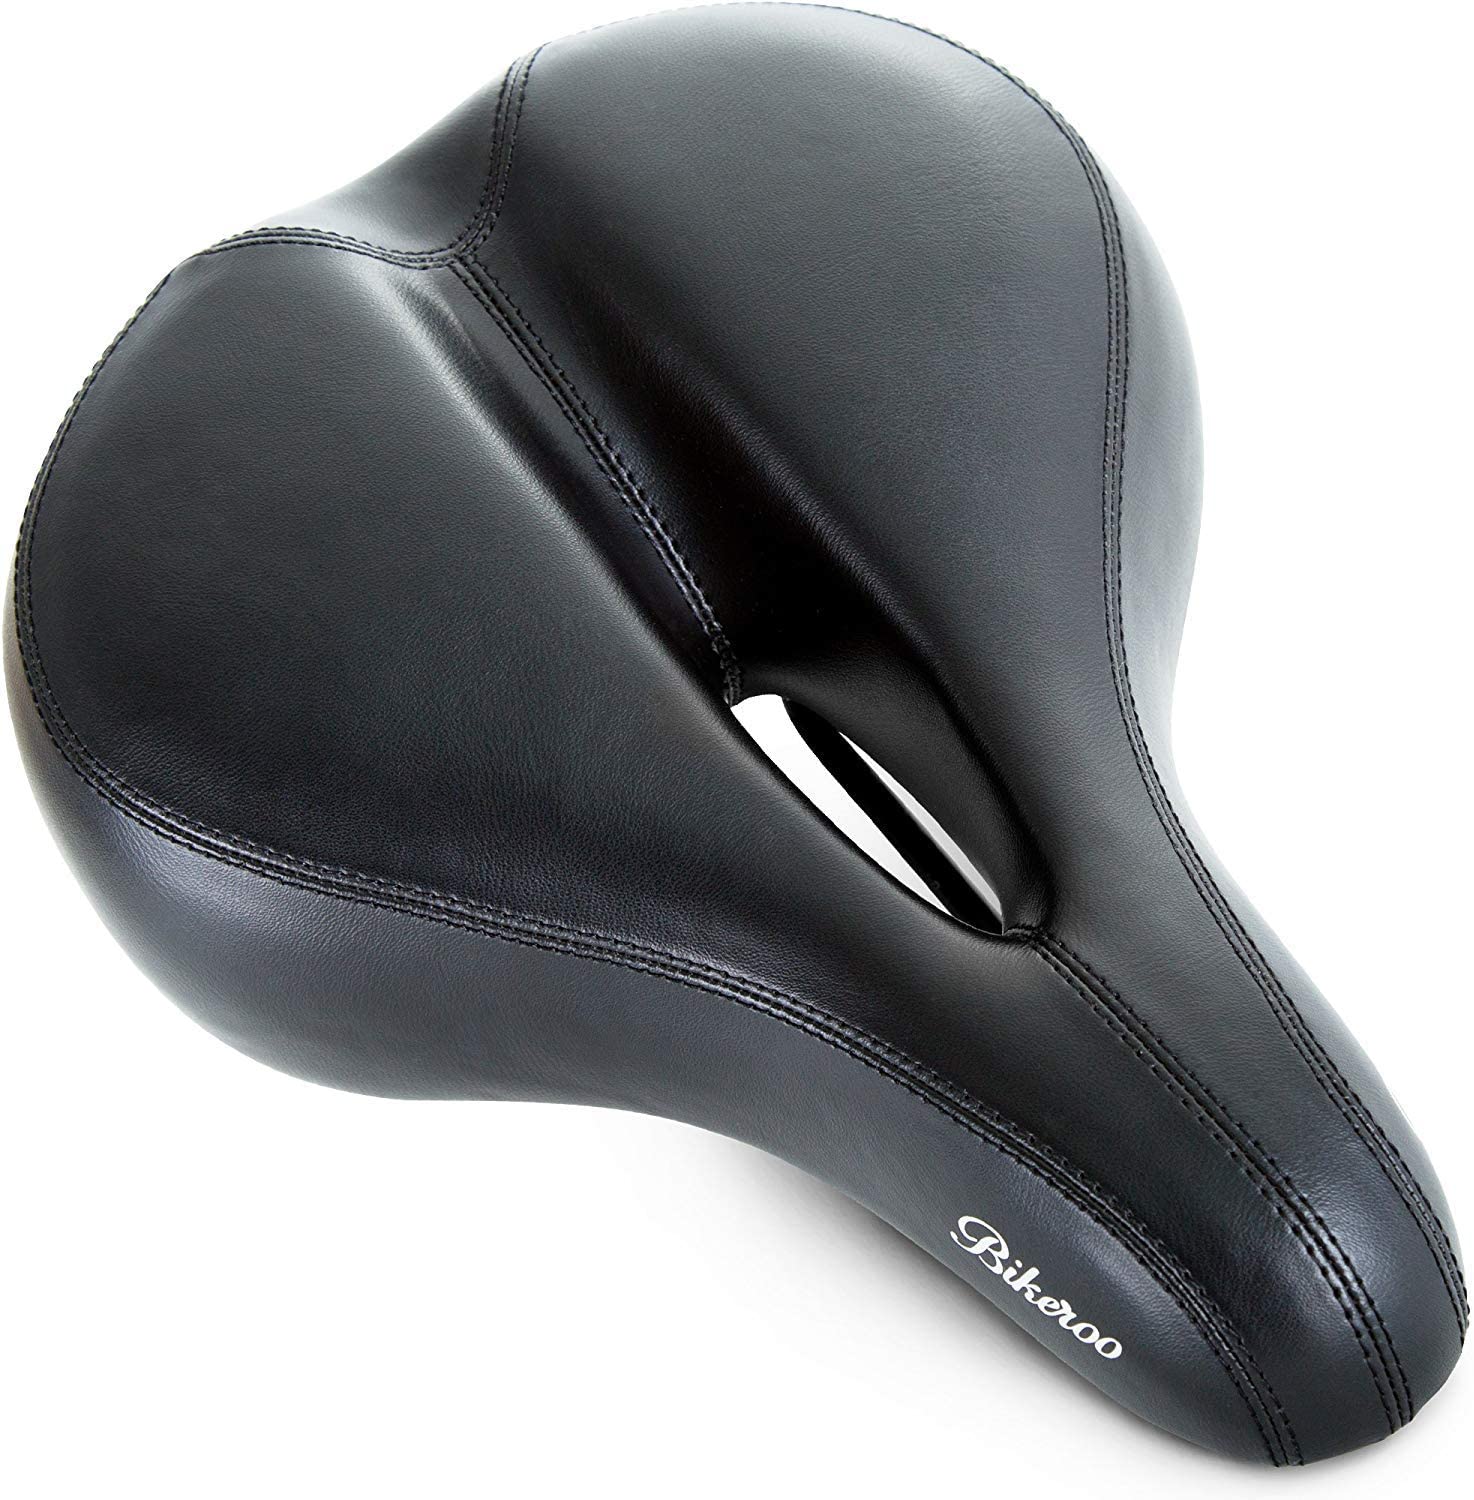 Lachi Bike Saddle Big Bicycle Seat,With Wide Cushion Shockproof Design for Women Men Fit for Mountain Bike,Road Bikes,Indoor Spinning Exercise Bikes 